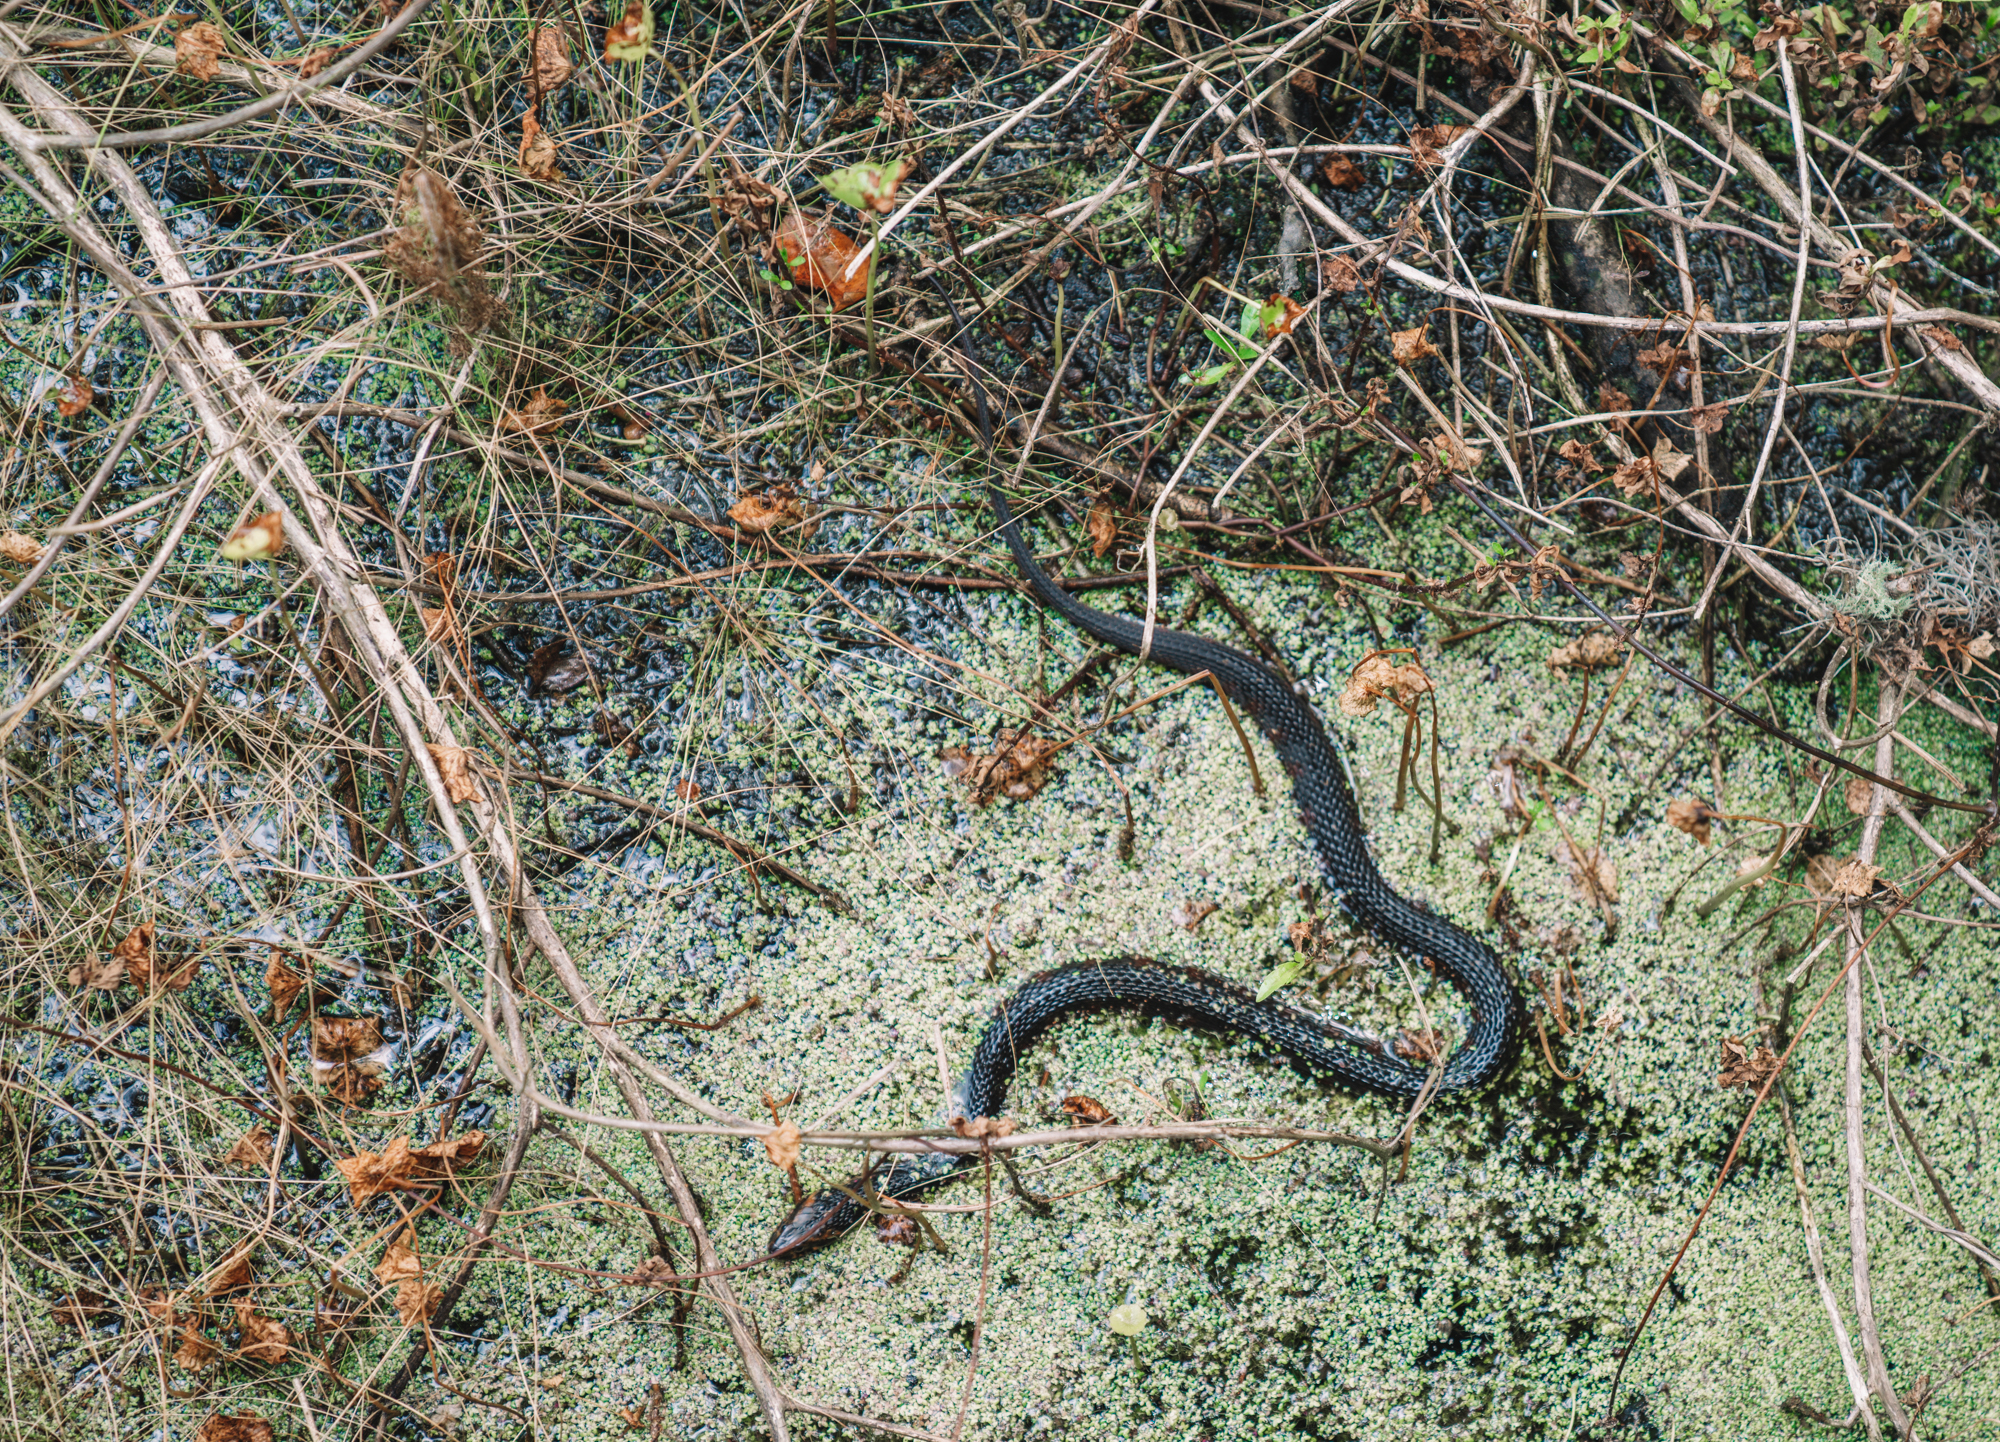 a black snake floats above the water in the swamp.